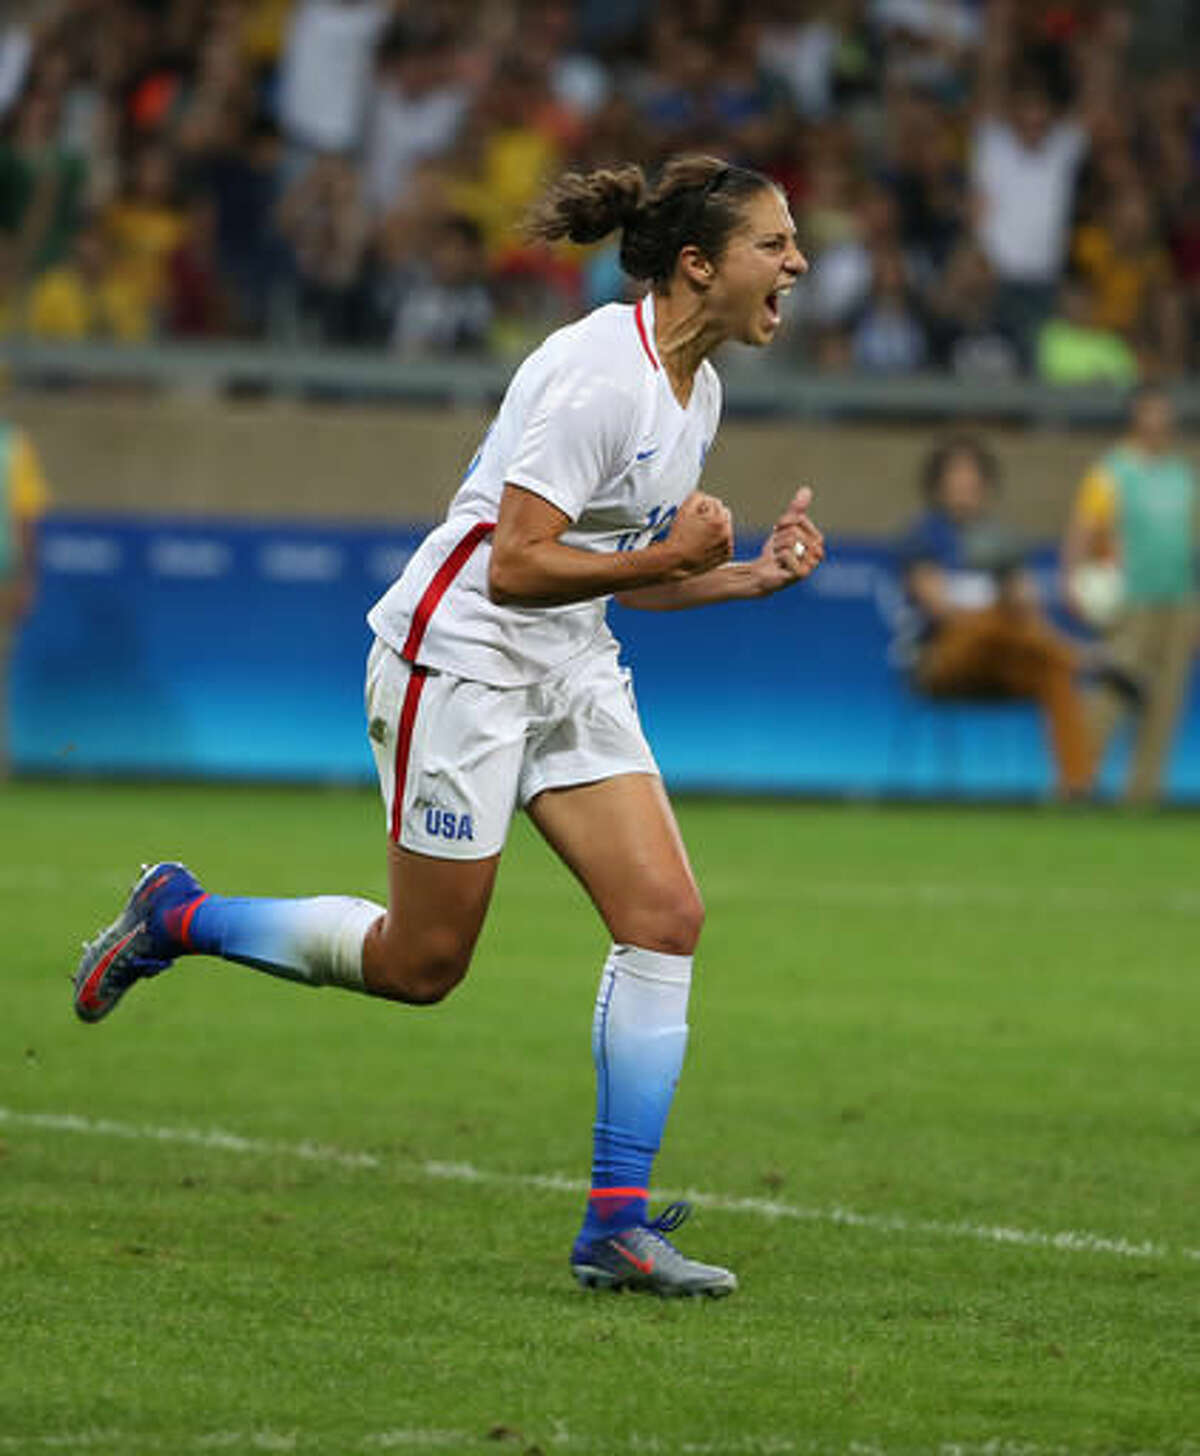 United States's Carli Lloyd, celebrates her goal during a group G match of the women's Olympic football tournament between United States and France at the Mineirao stadium in Belo Horizonte, Brazil, Saturday, Aug. 6, 2016. (AP Photo/Eugenio Savio)